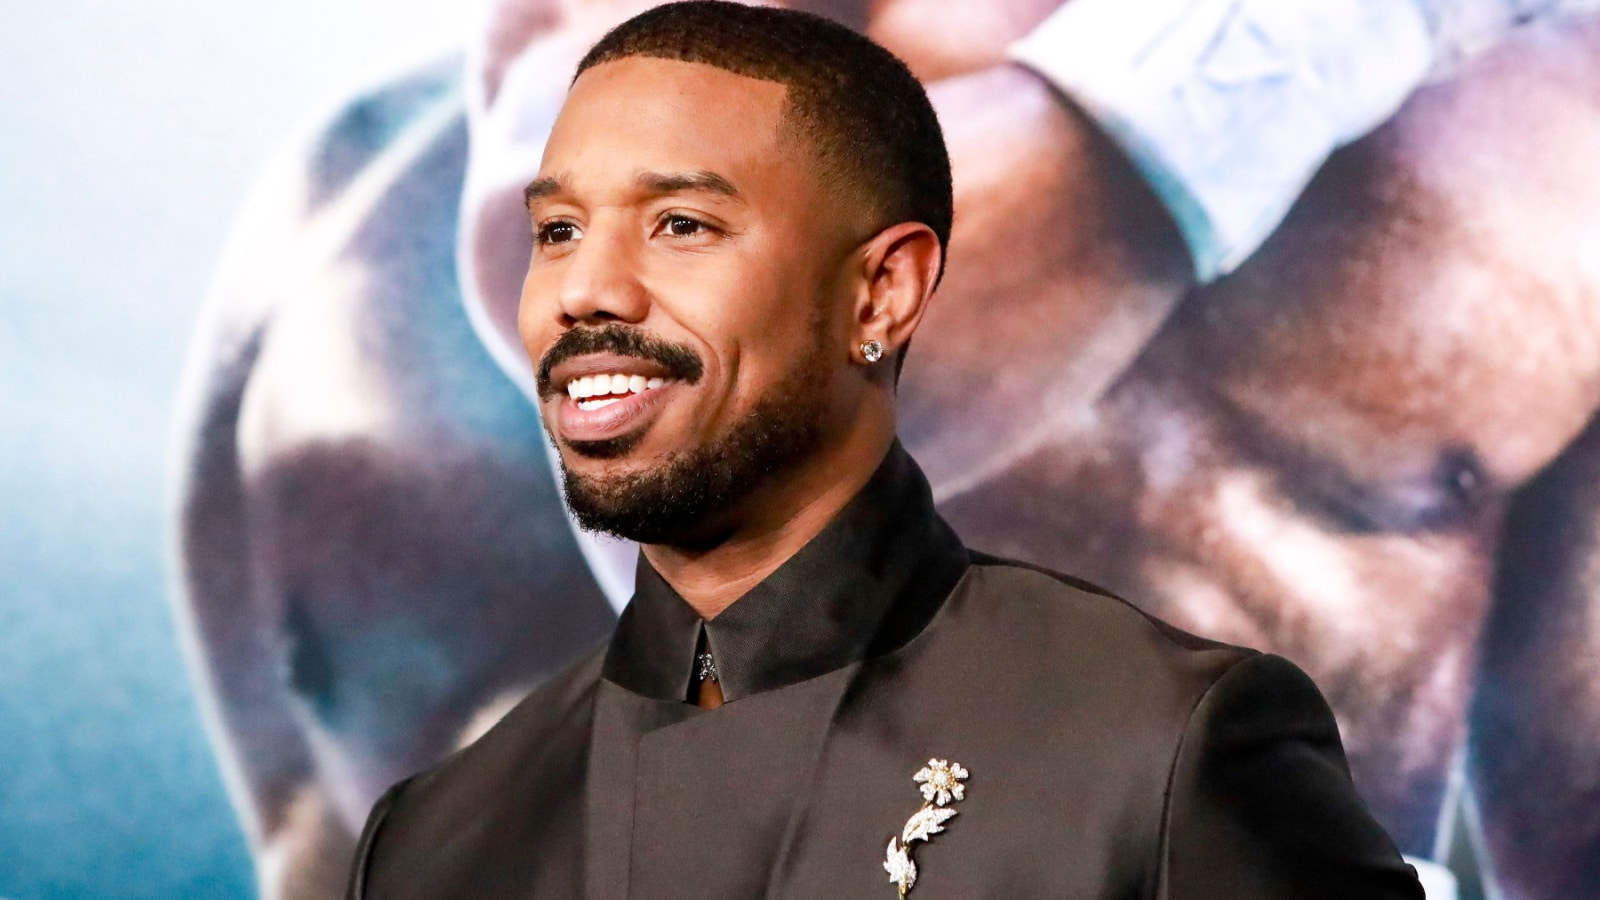 LOS ANGELS, CA - FEB 27, 2023: Michael B Jordan at the premiere of Creed III at the TCL Chinese Theatre IMAX